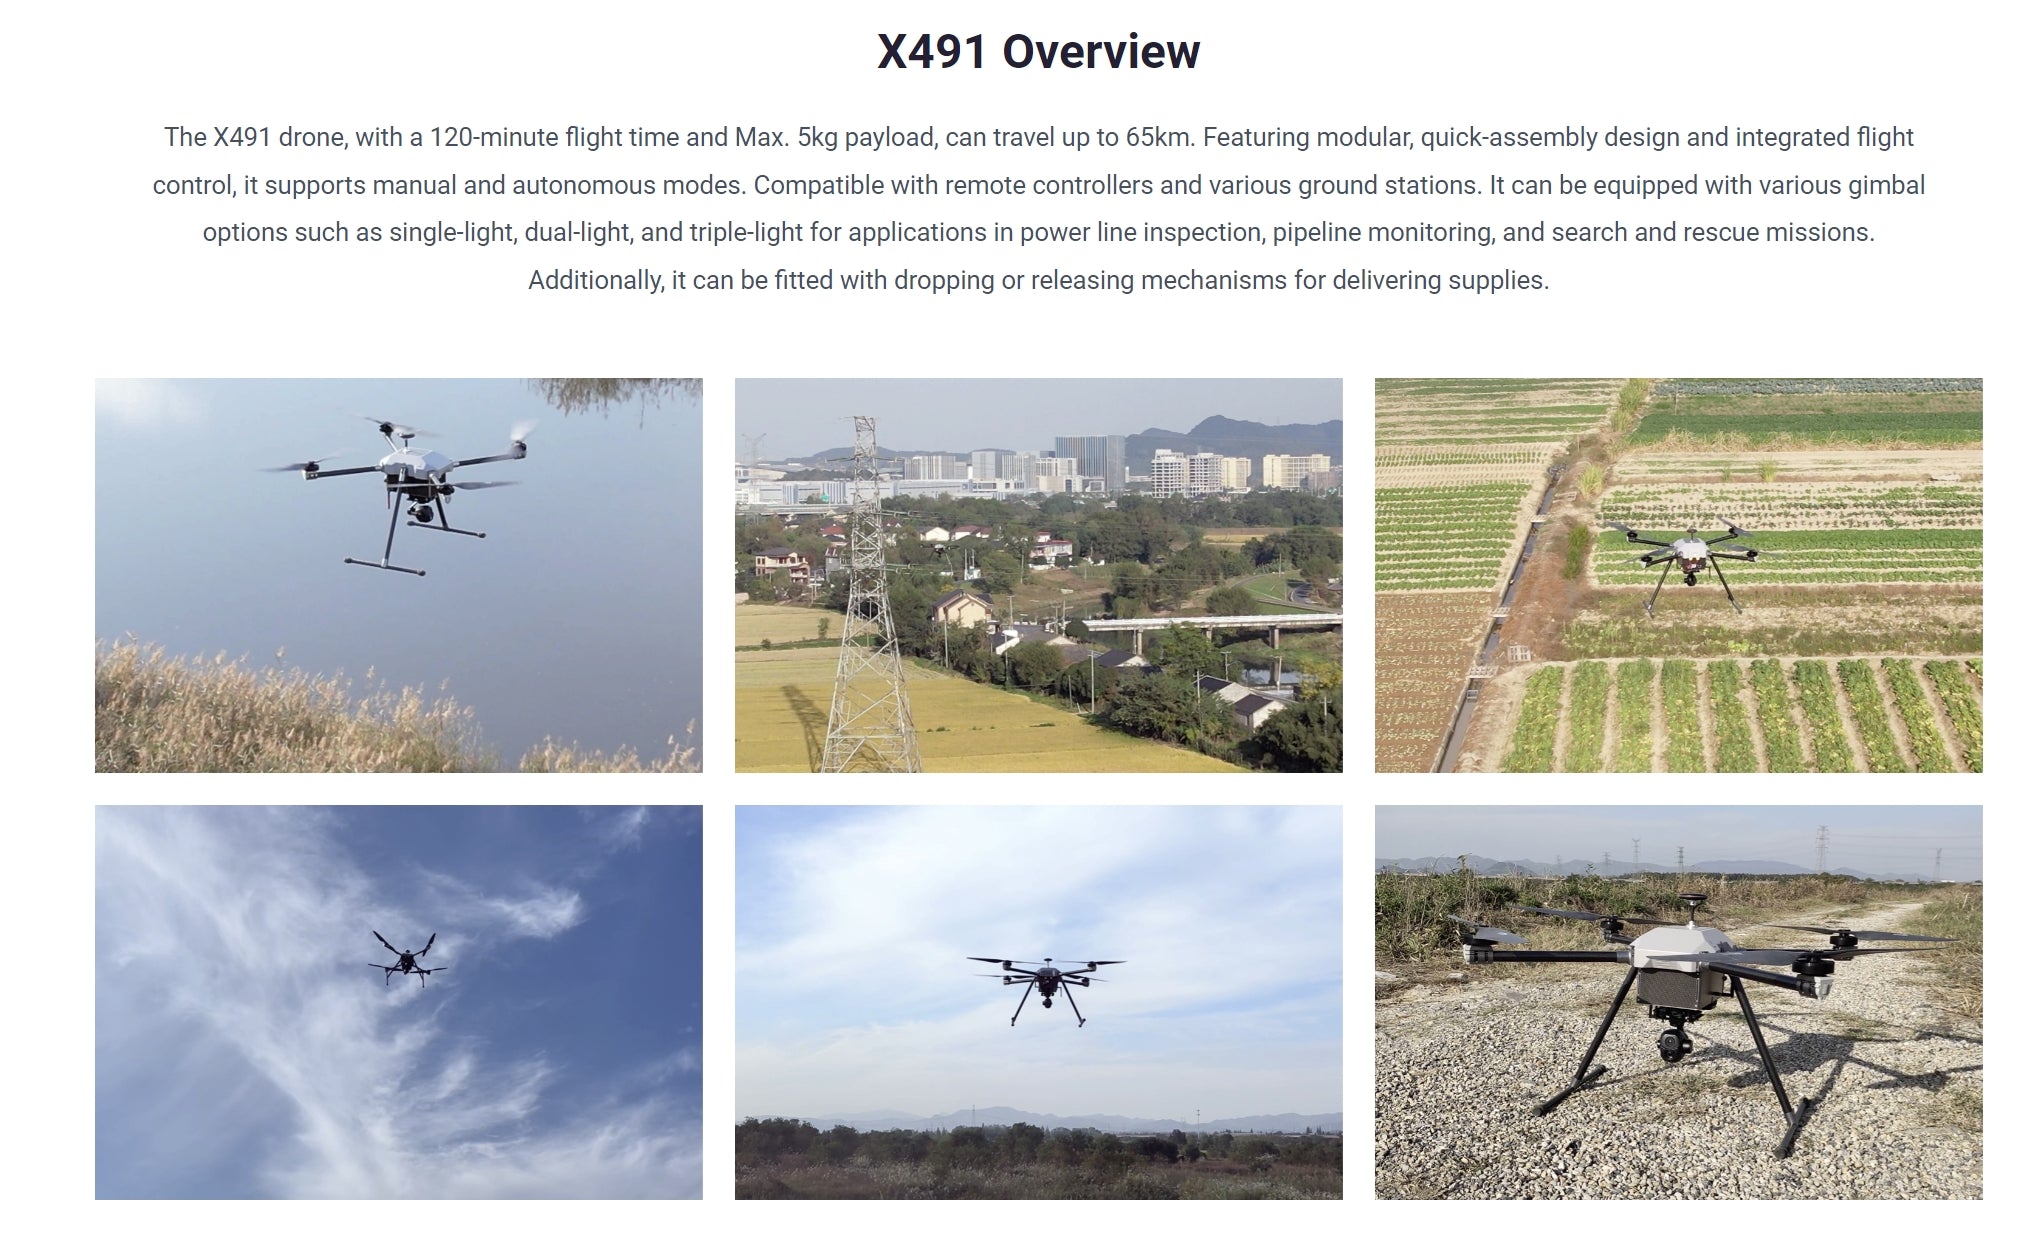 X491 Ultra Long Endurance Drone, X491 drone; with a 120-minute flight time and Max payload;